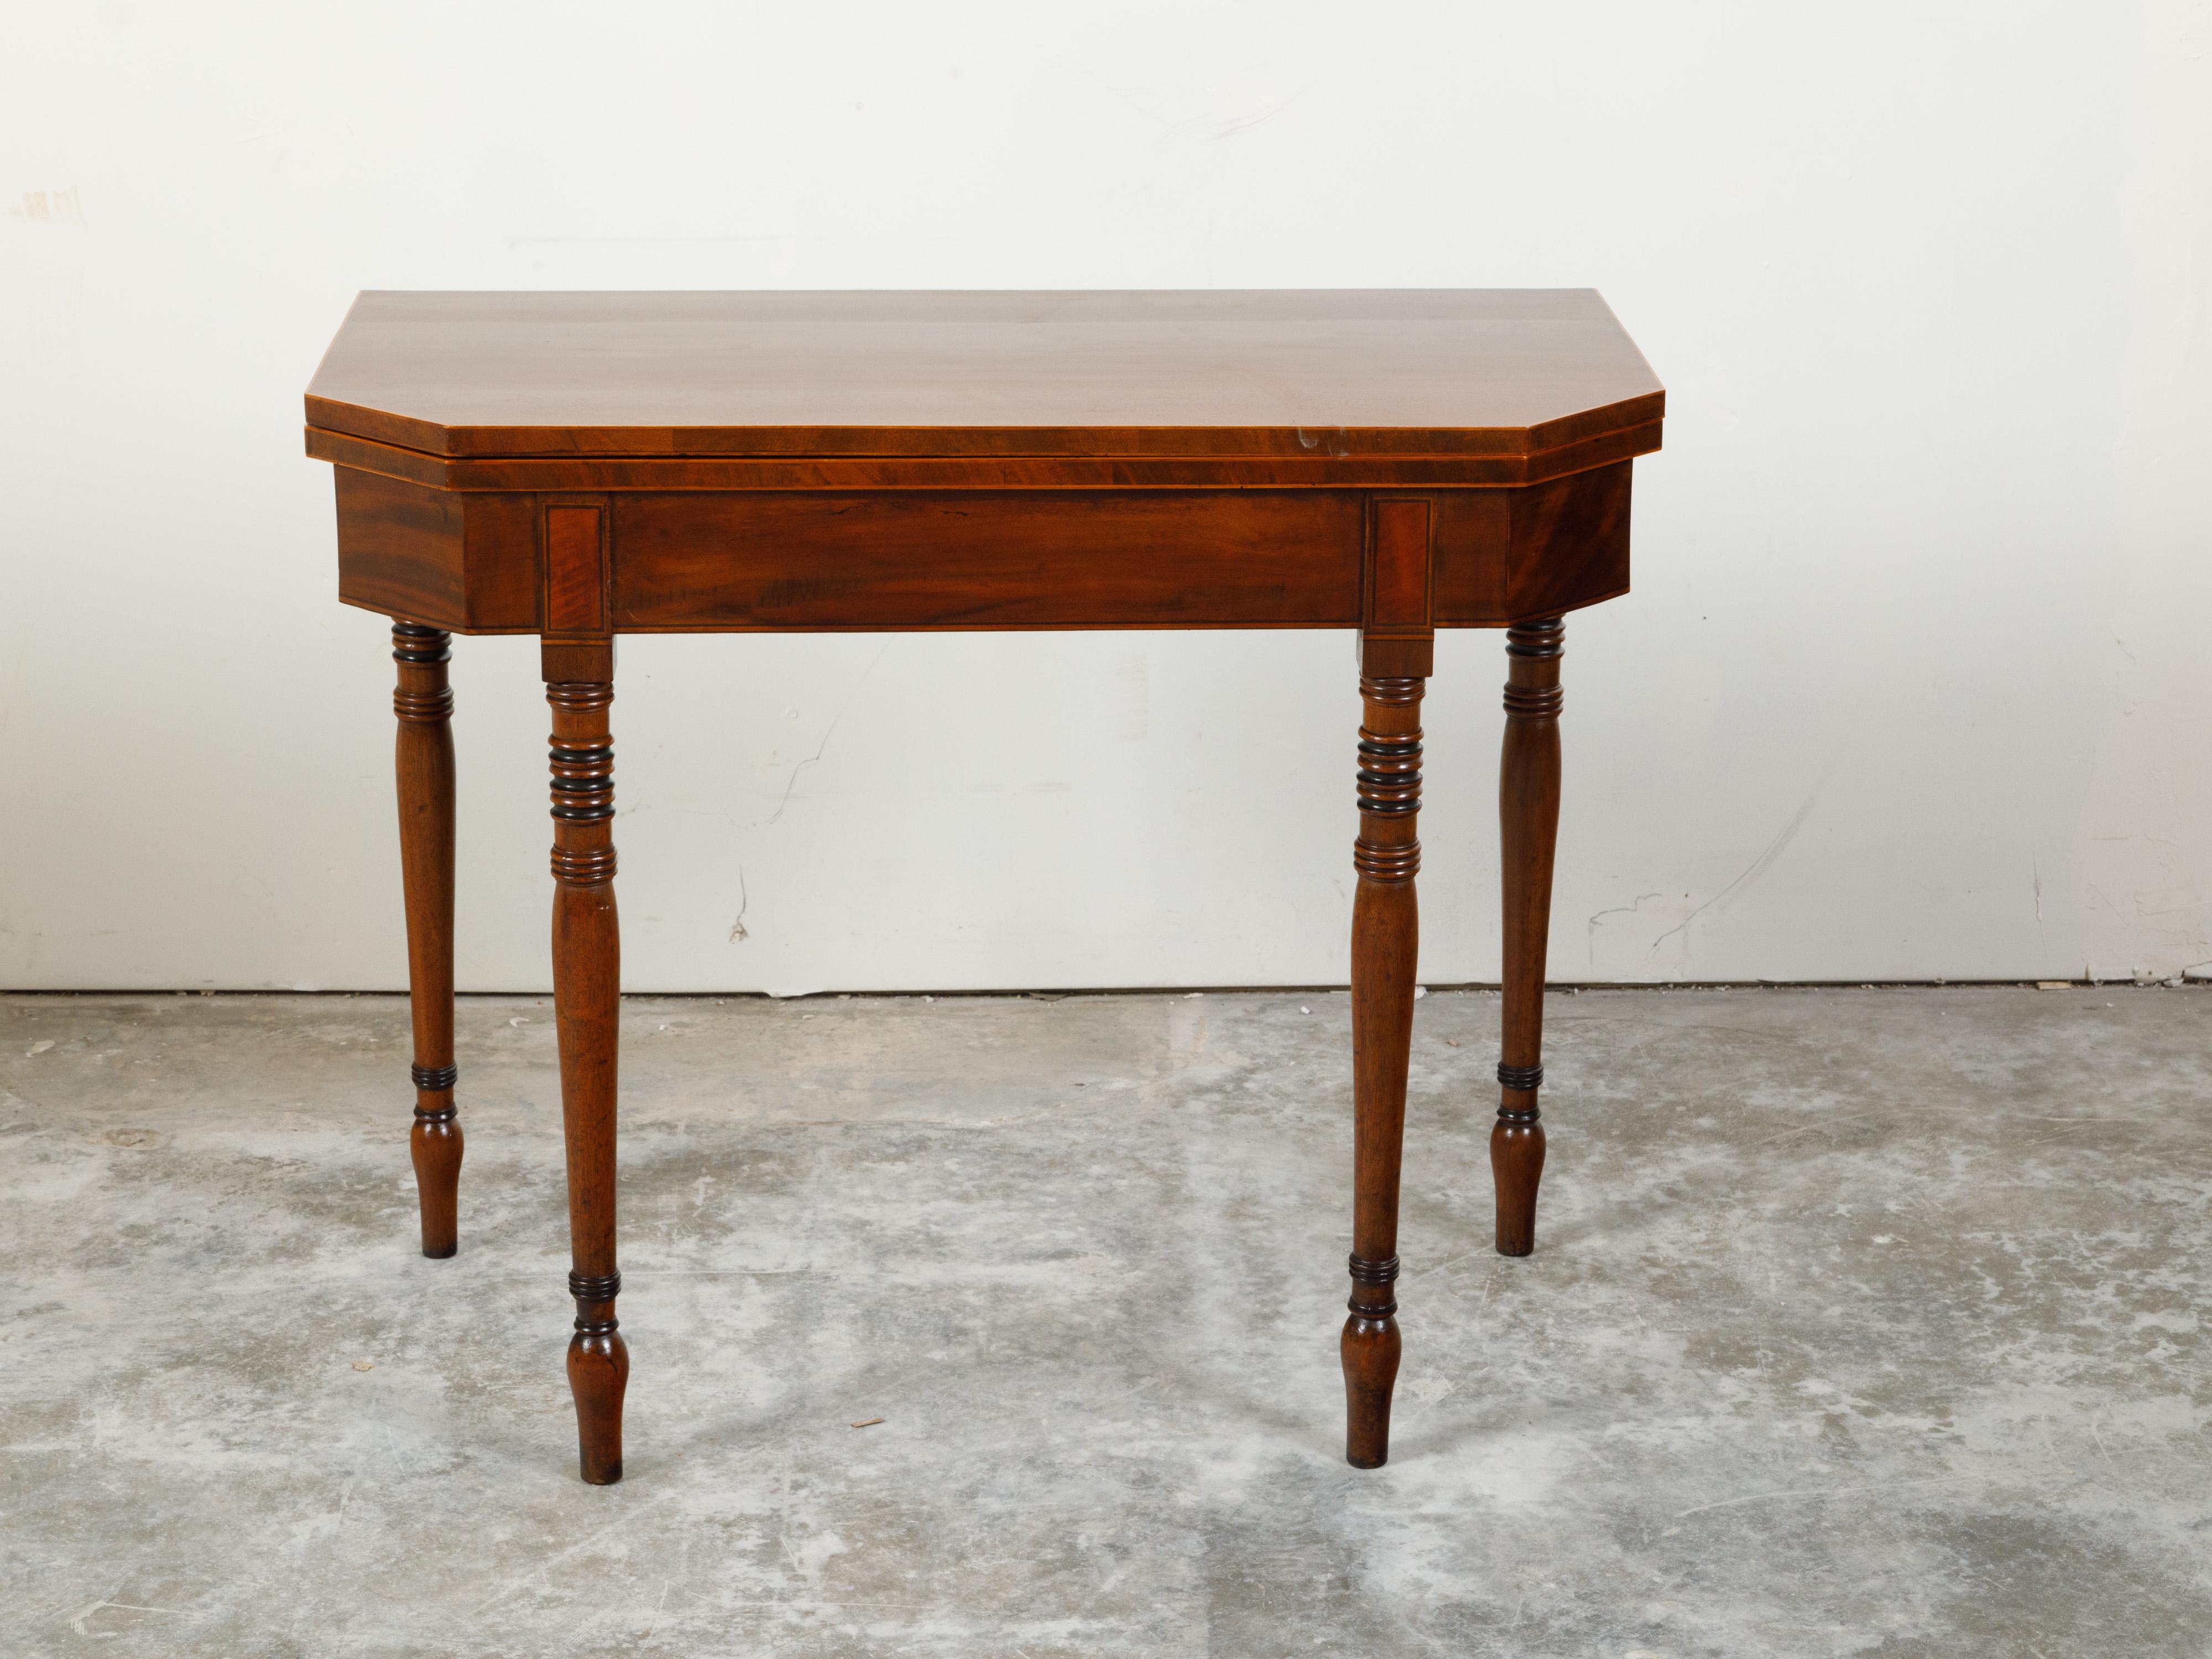 An English Regency period lift top console table from the early 19th century, with turned legs and elongated arrow feet. Created in England during the first quarter of the 19th century, this Regency table features a rectangular lift top with canted